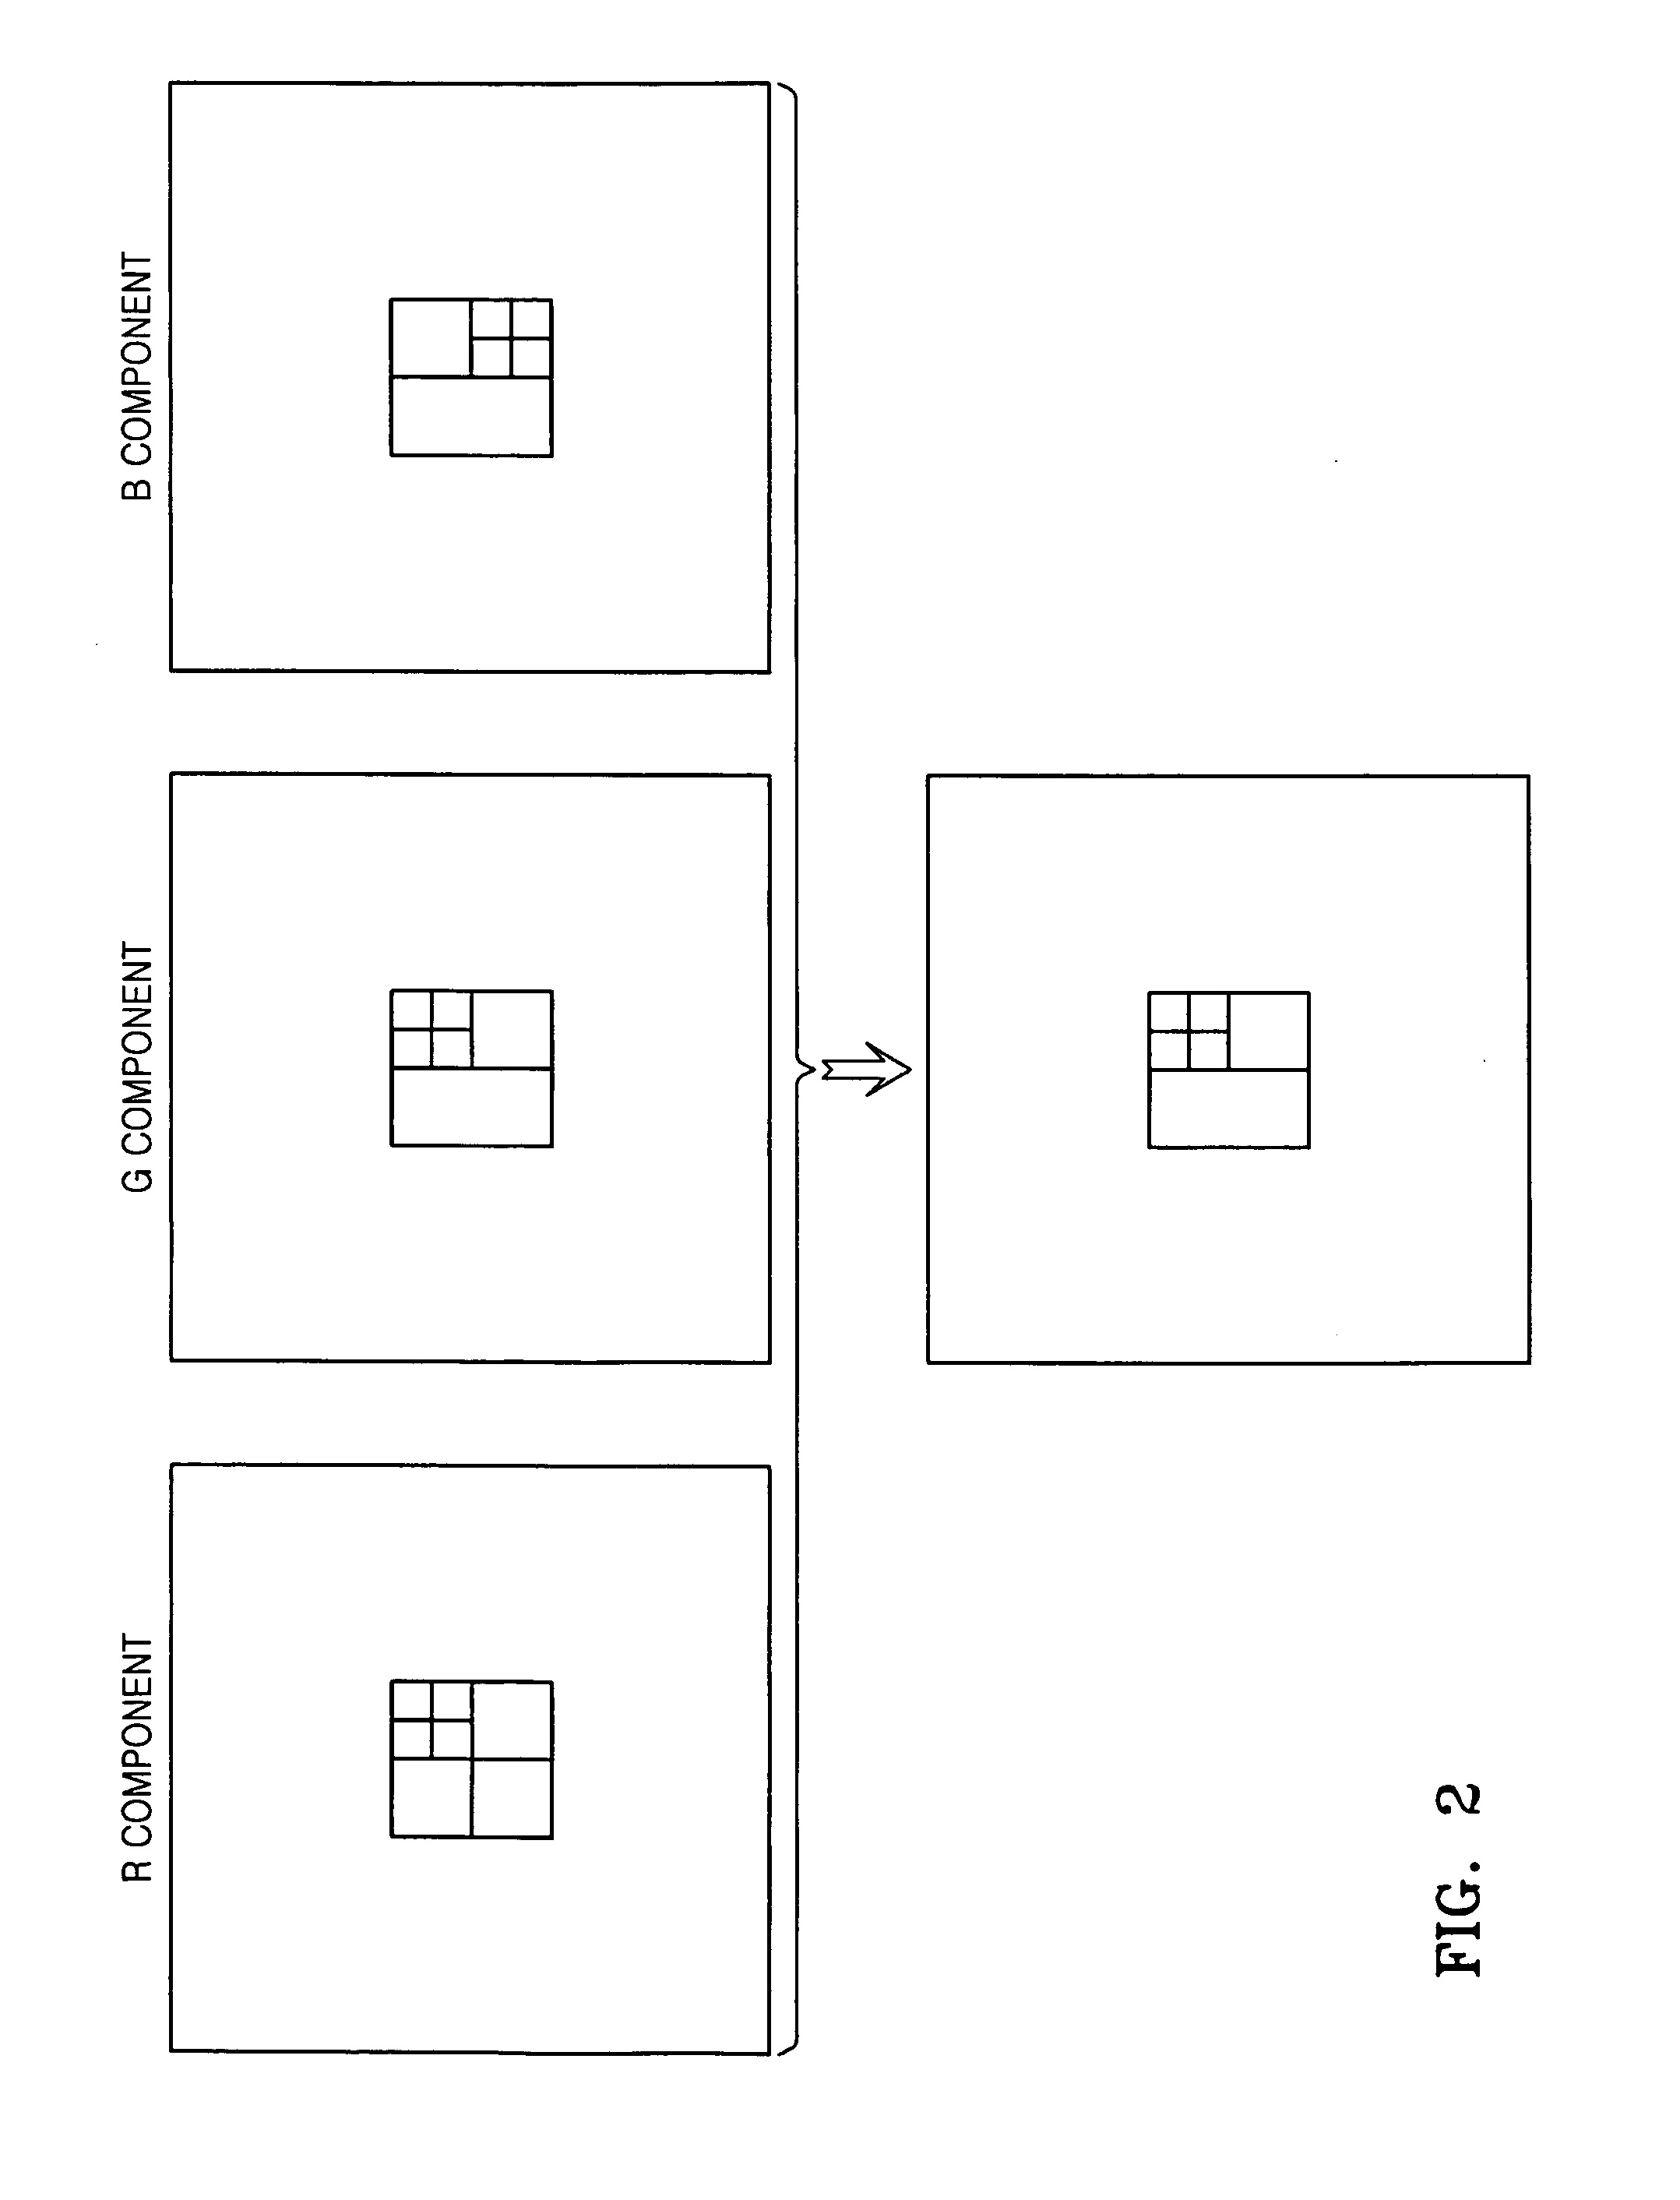 Moving picture coding/decoding method and apparatus